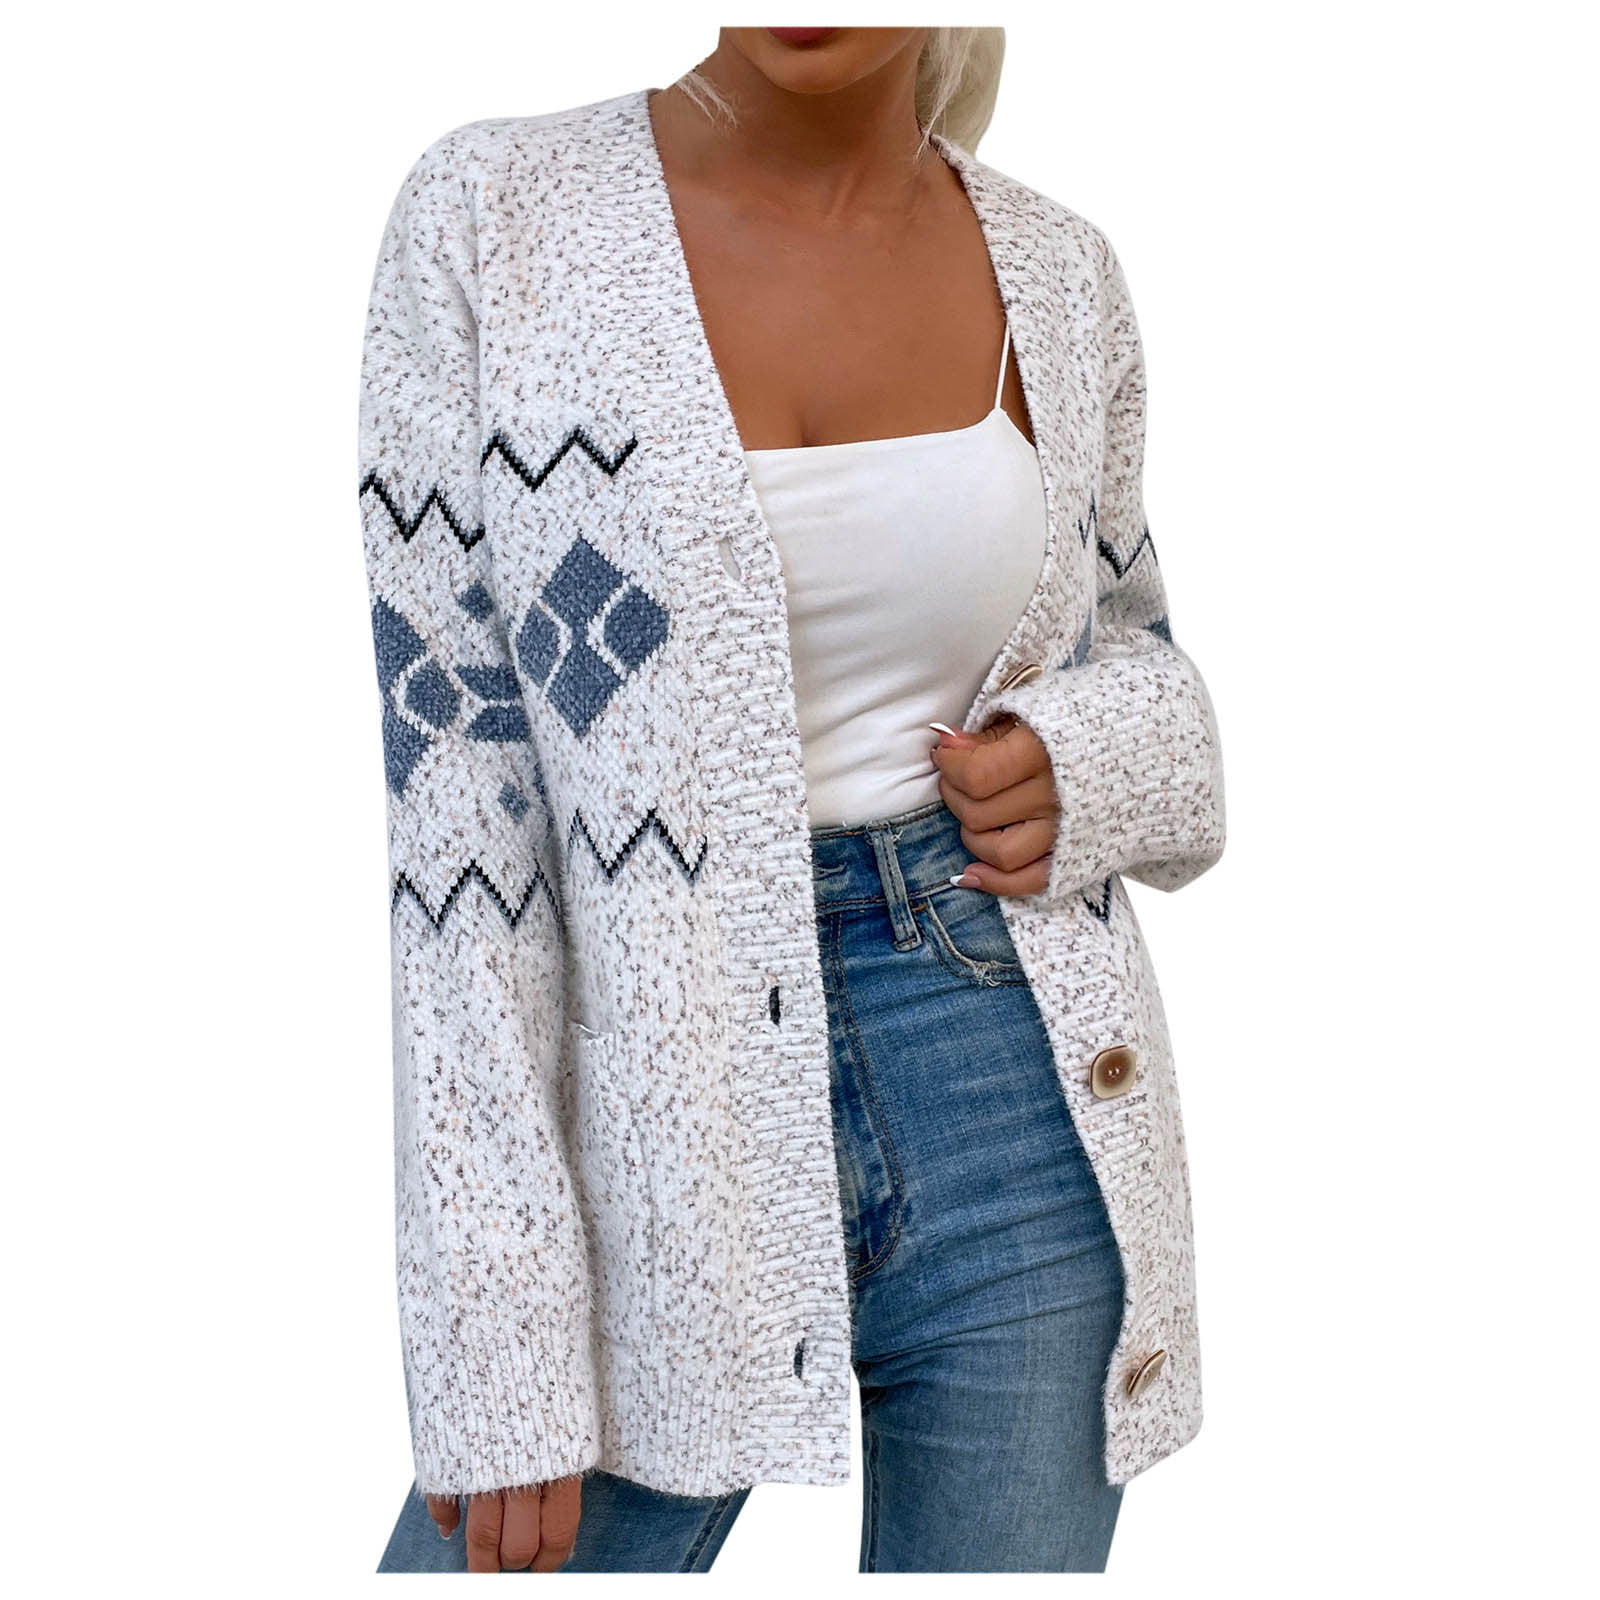 CAICJ98 Cardigan For Women Lightweight Womens Oversized Chunky Open Front Cardigan  Sweaters Cable Knit Long Sleeve Cardigans Outwear Coats Beige,S -  Walmart.com